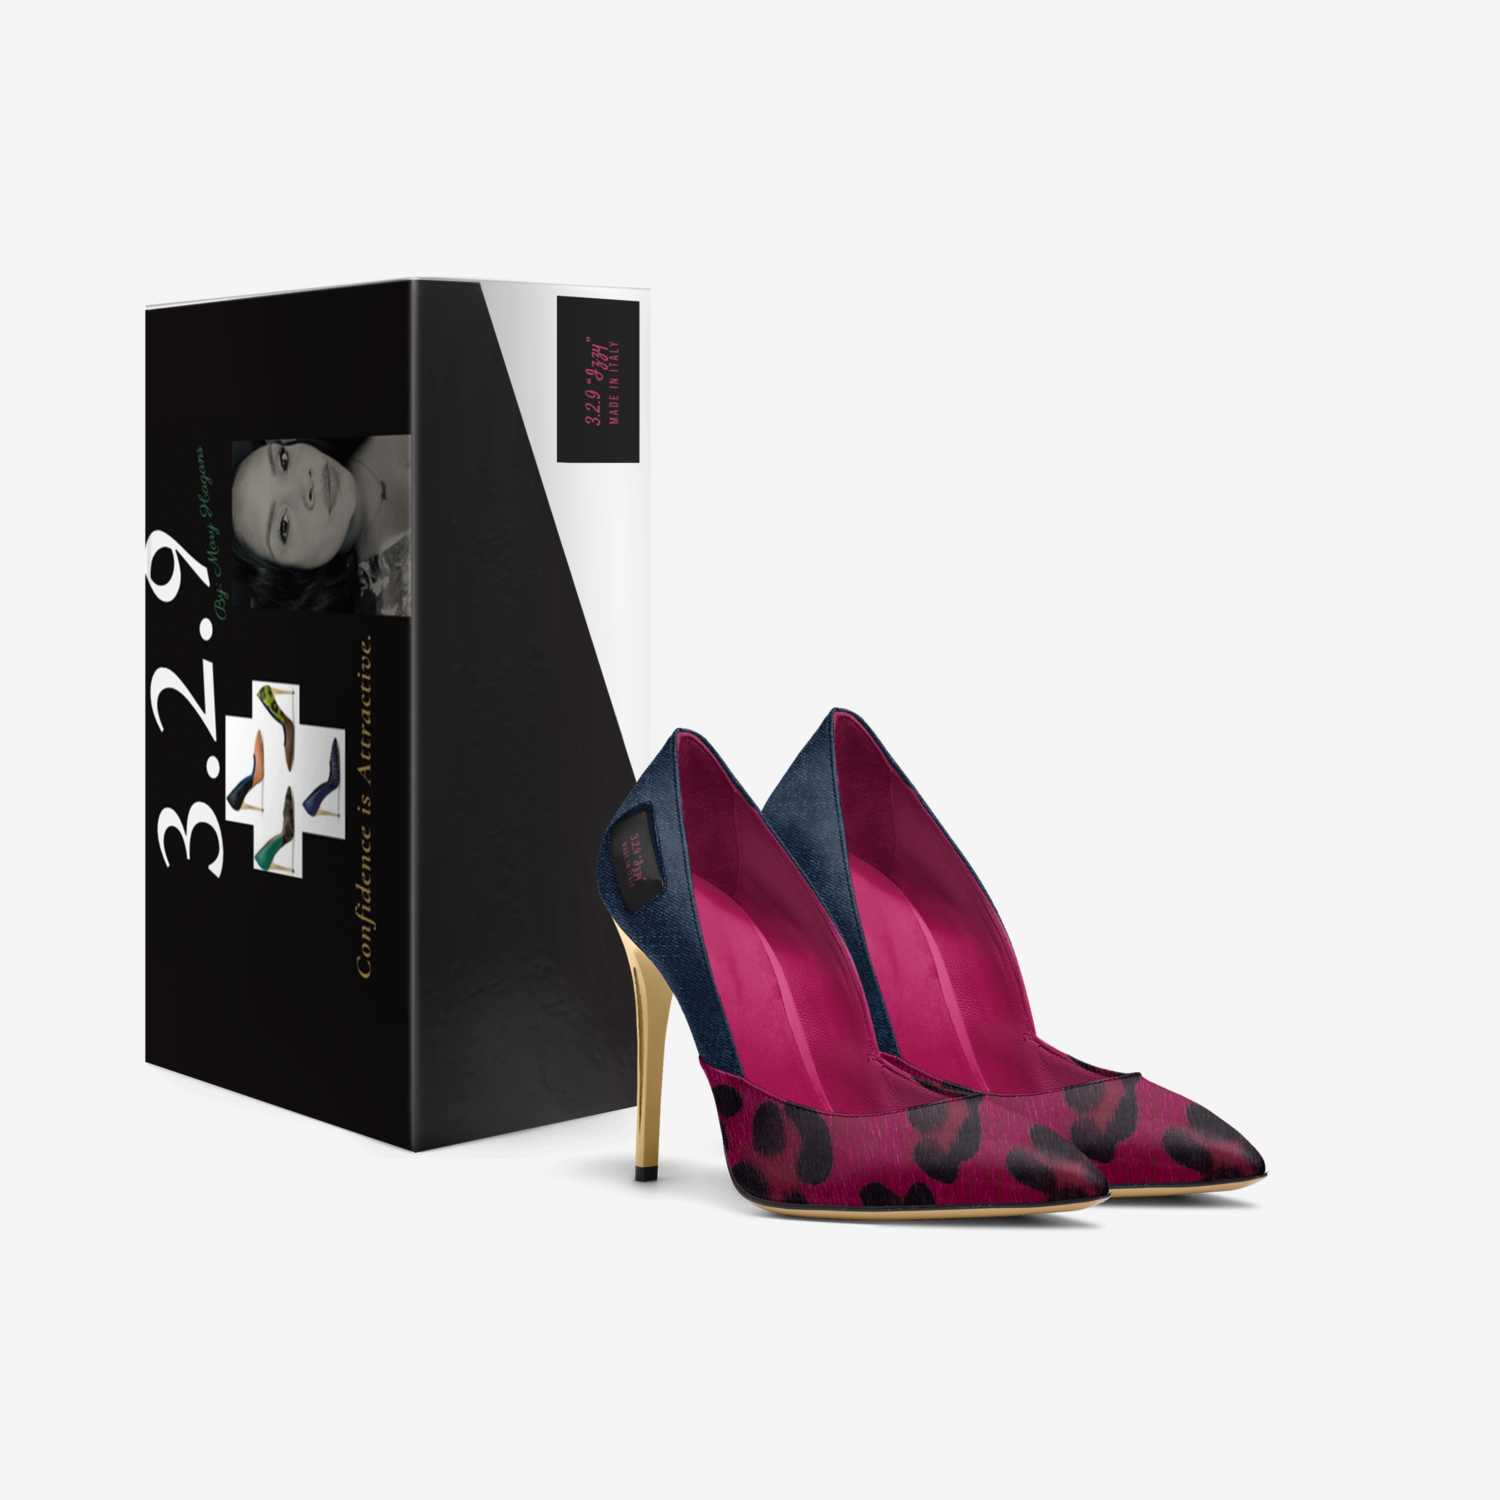 Kara custom made in Italy shoes by Camille Rachon | Box view